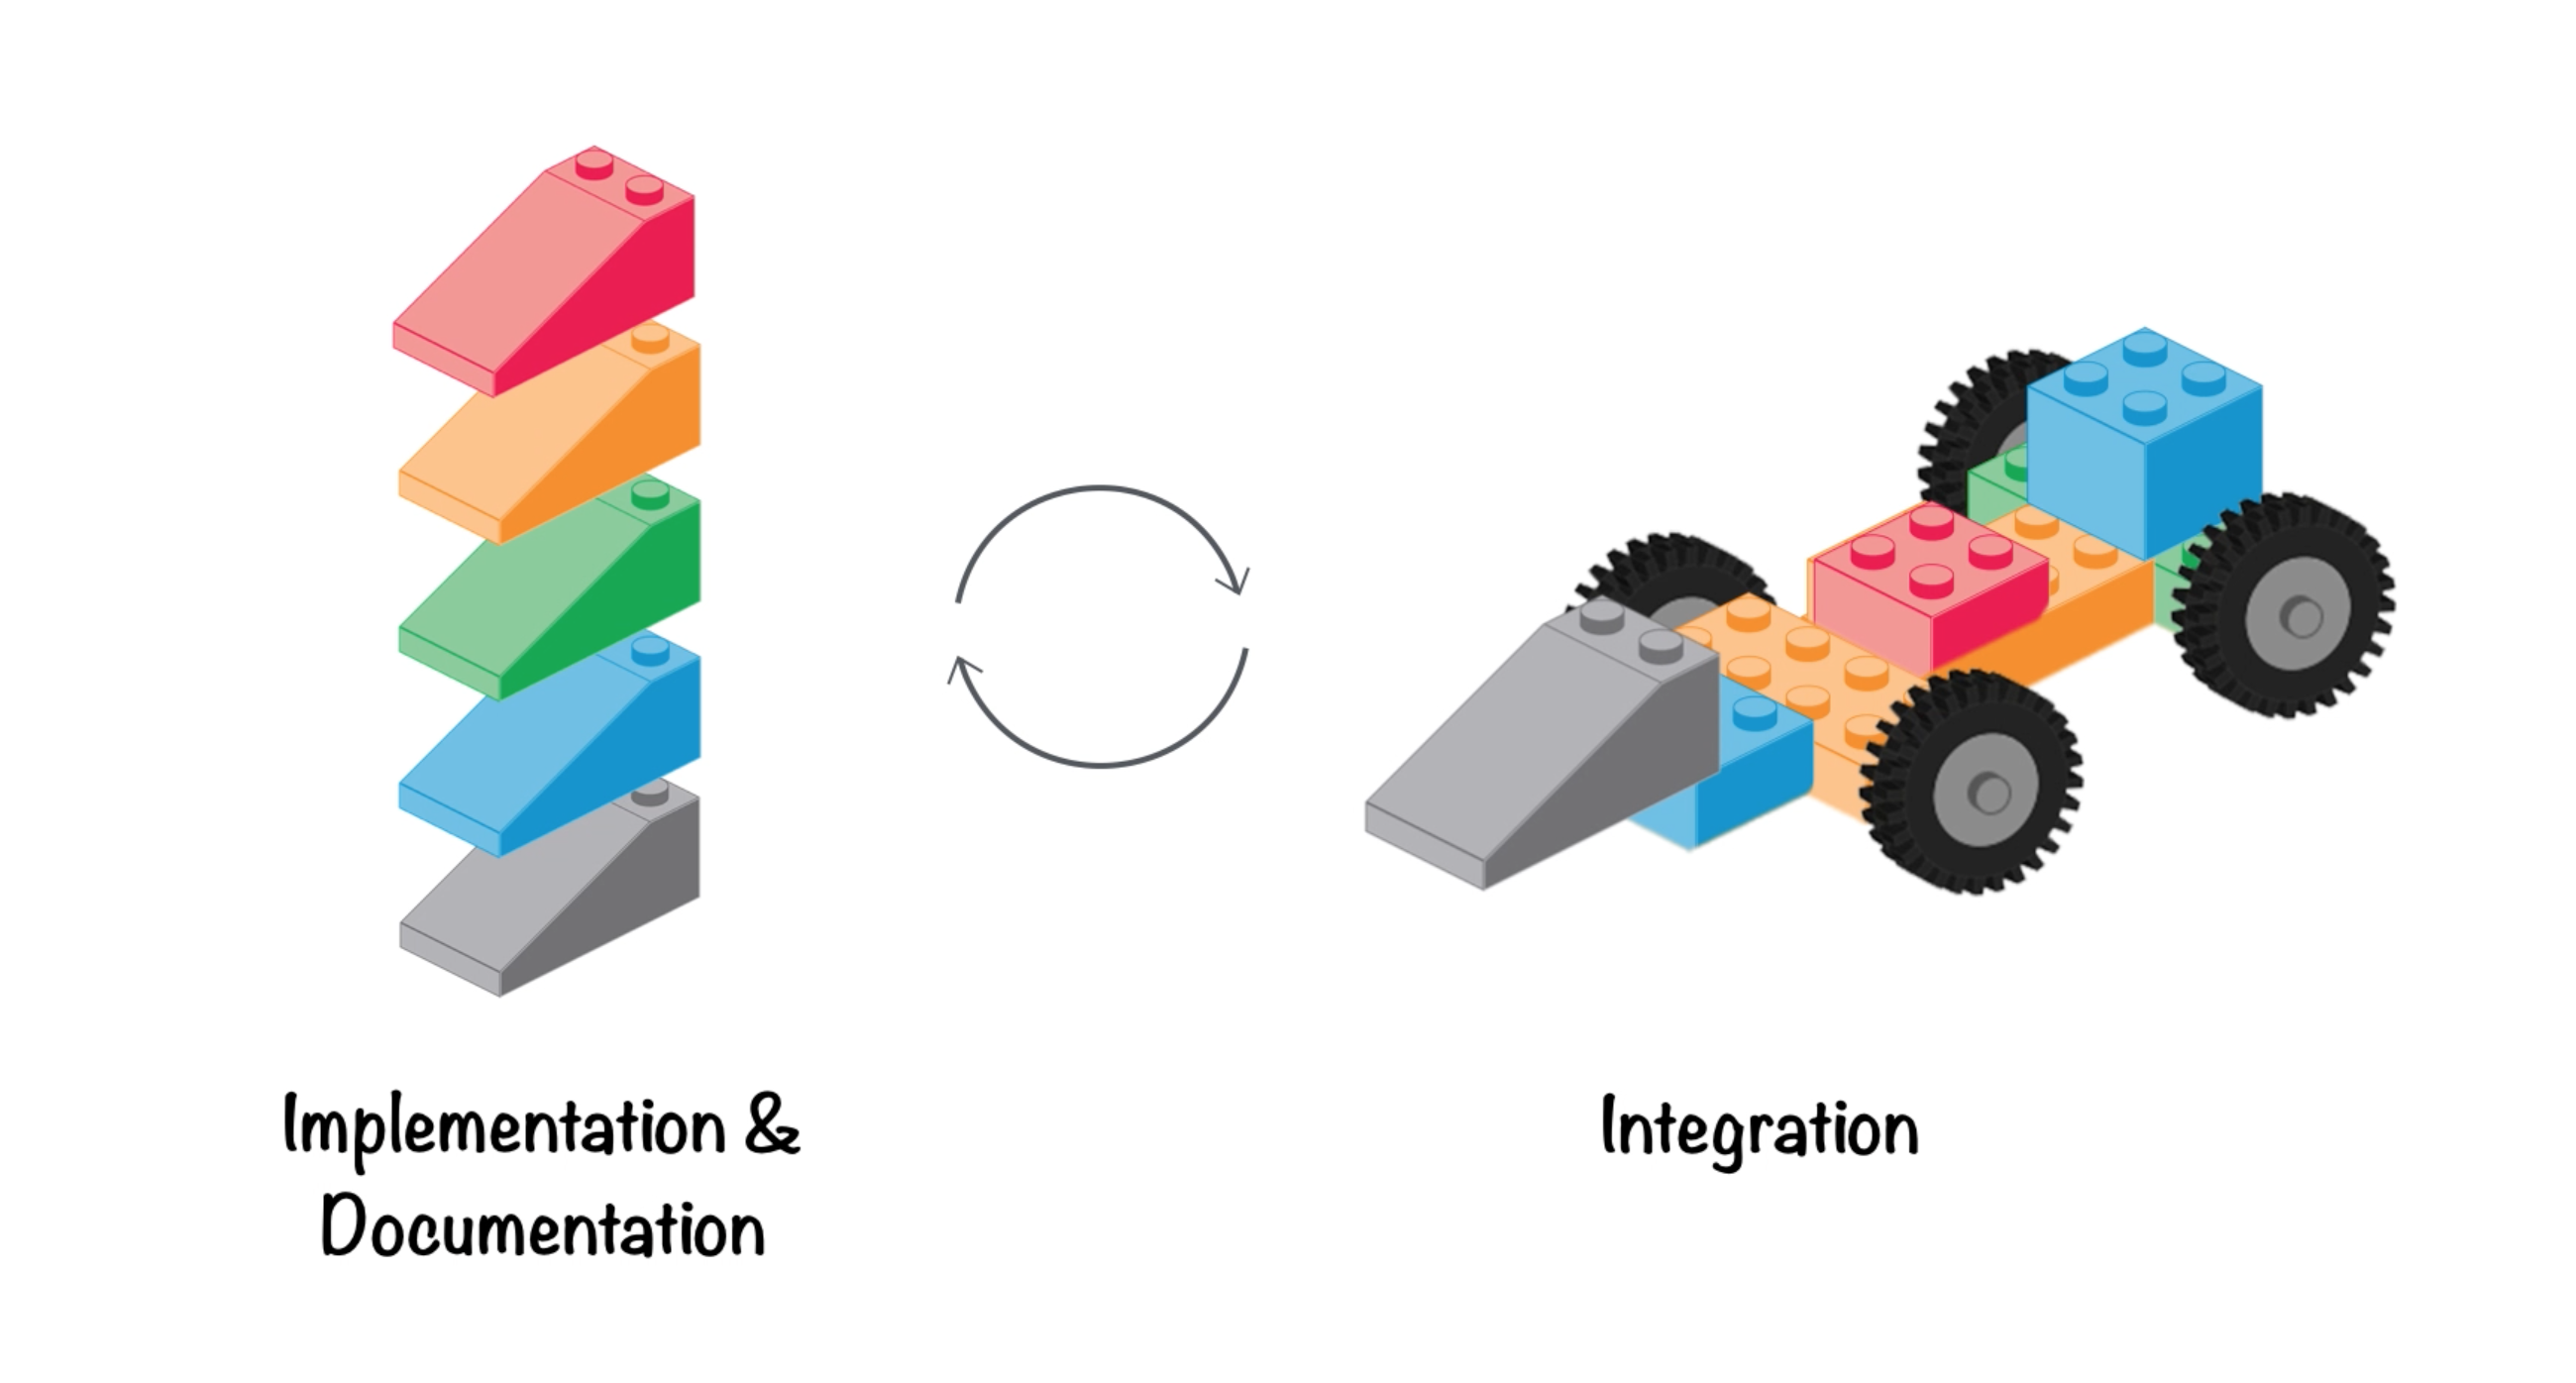 Documenting and integration is continuous process